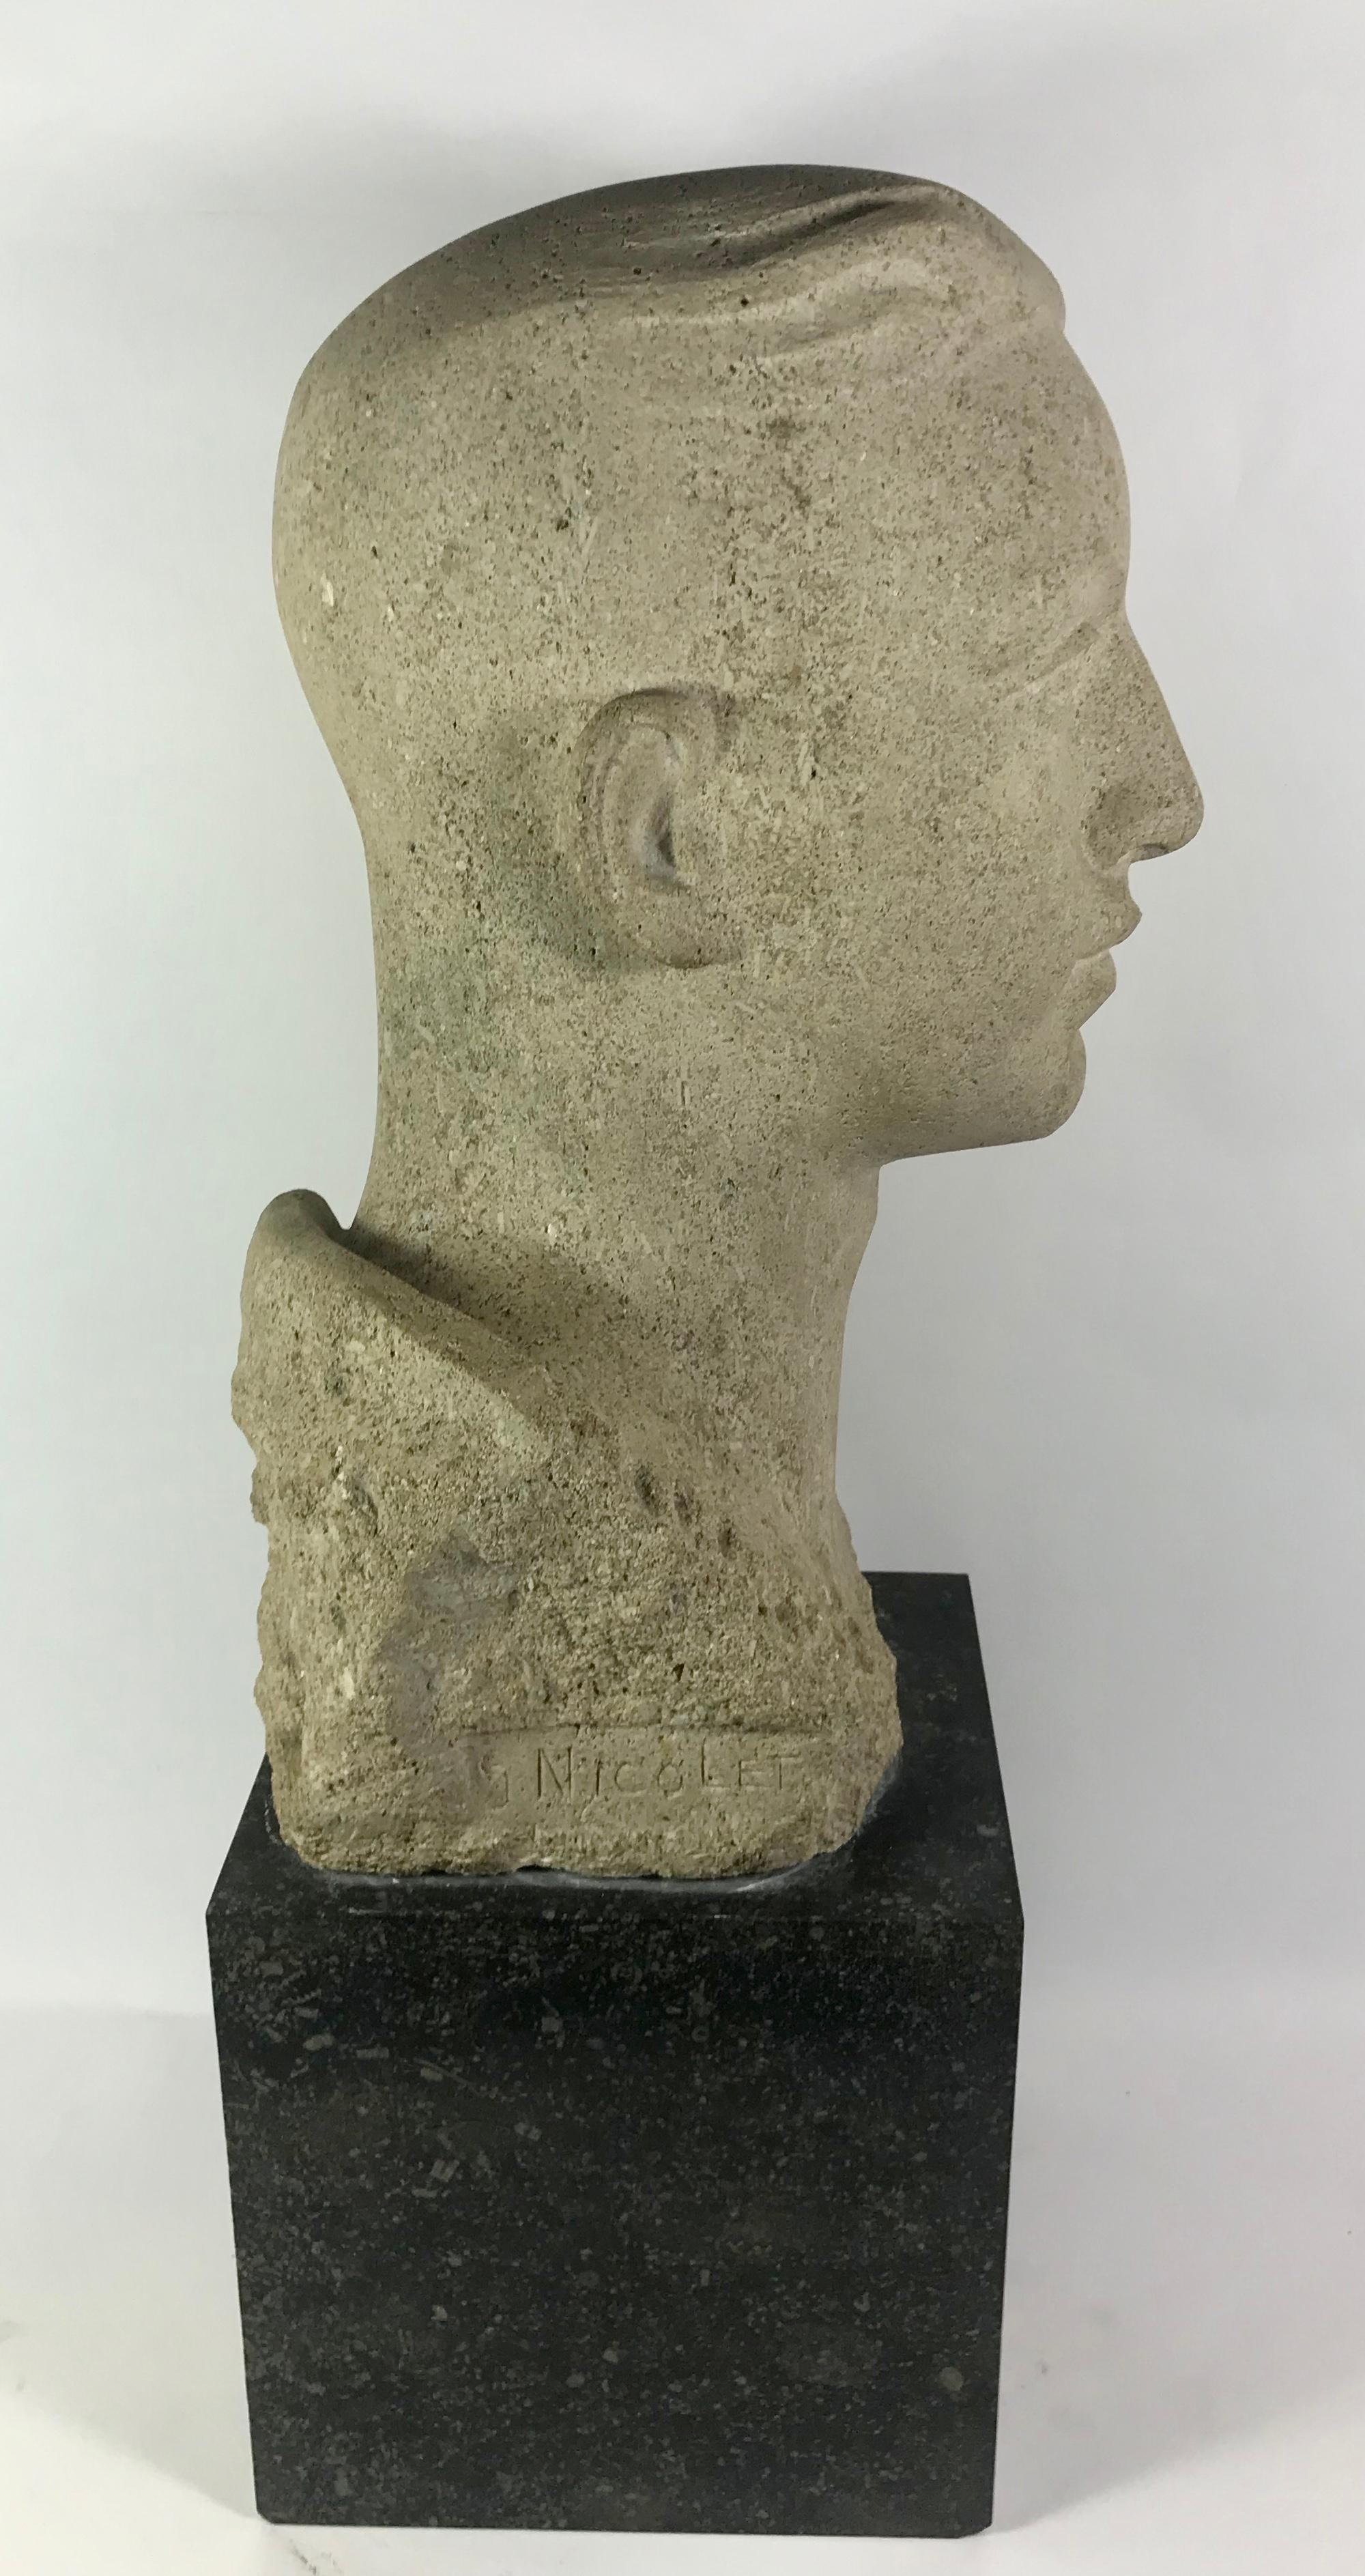 Head of a young man in granite on a black marble statute.
Signed: S. Nicolet.